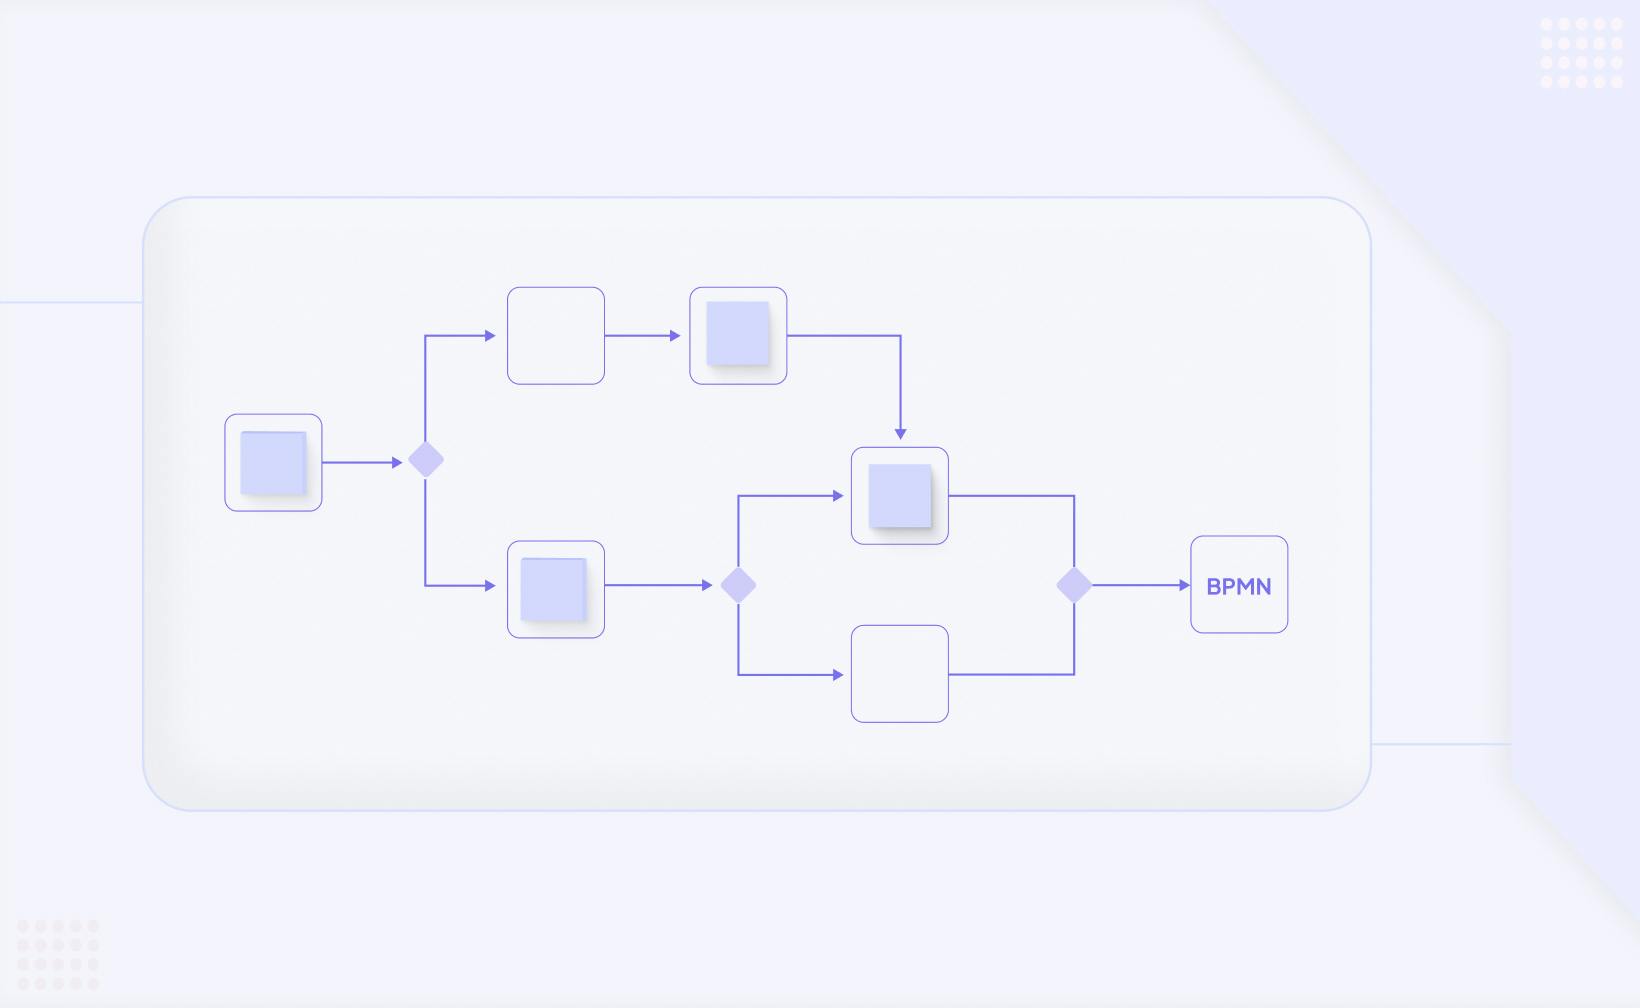 Creating a BPMN Viewer and Editor: A Visual Guide